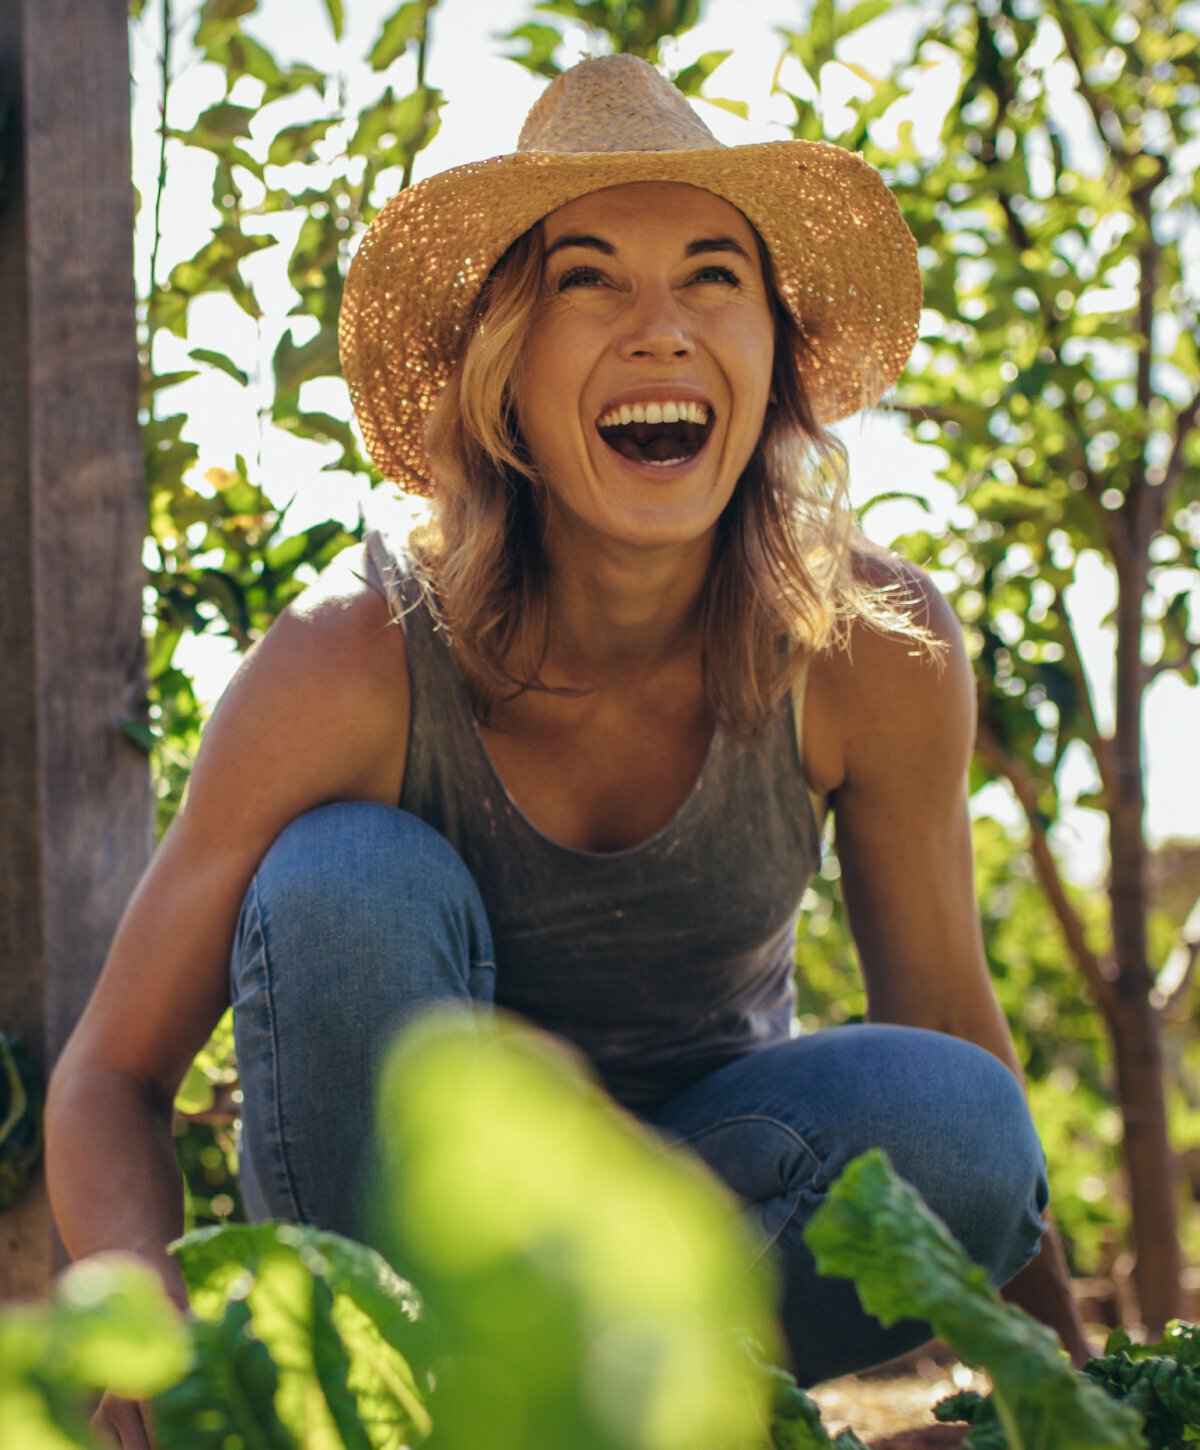 river edge preventative dentistry model laughing and wearing a sun hat and overalls